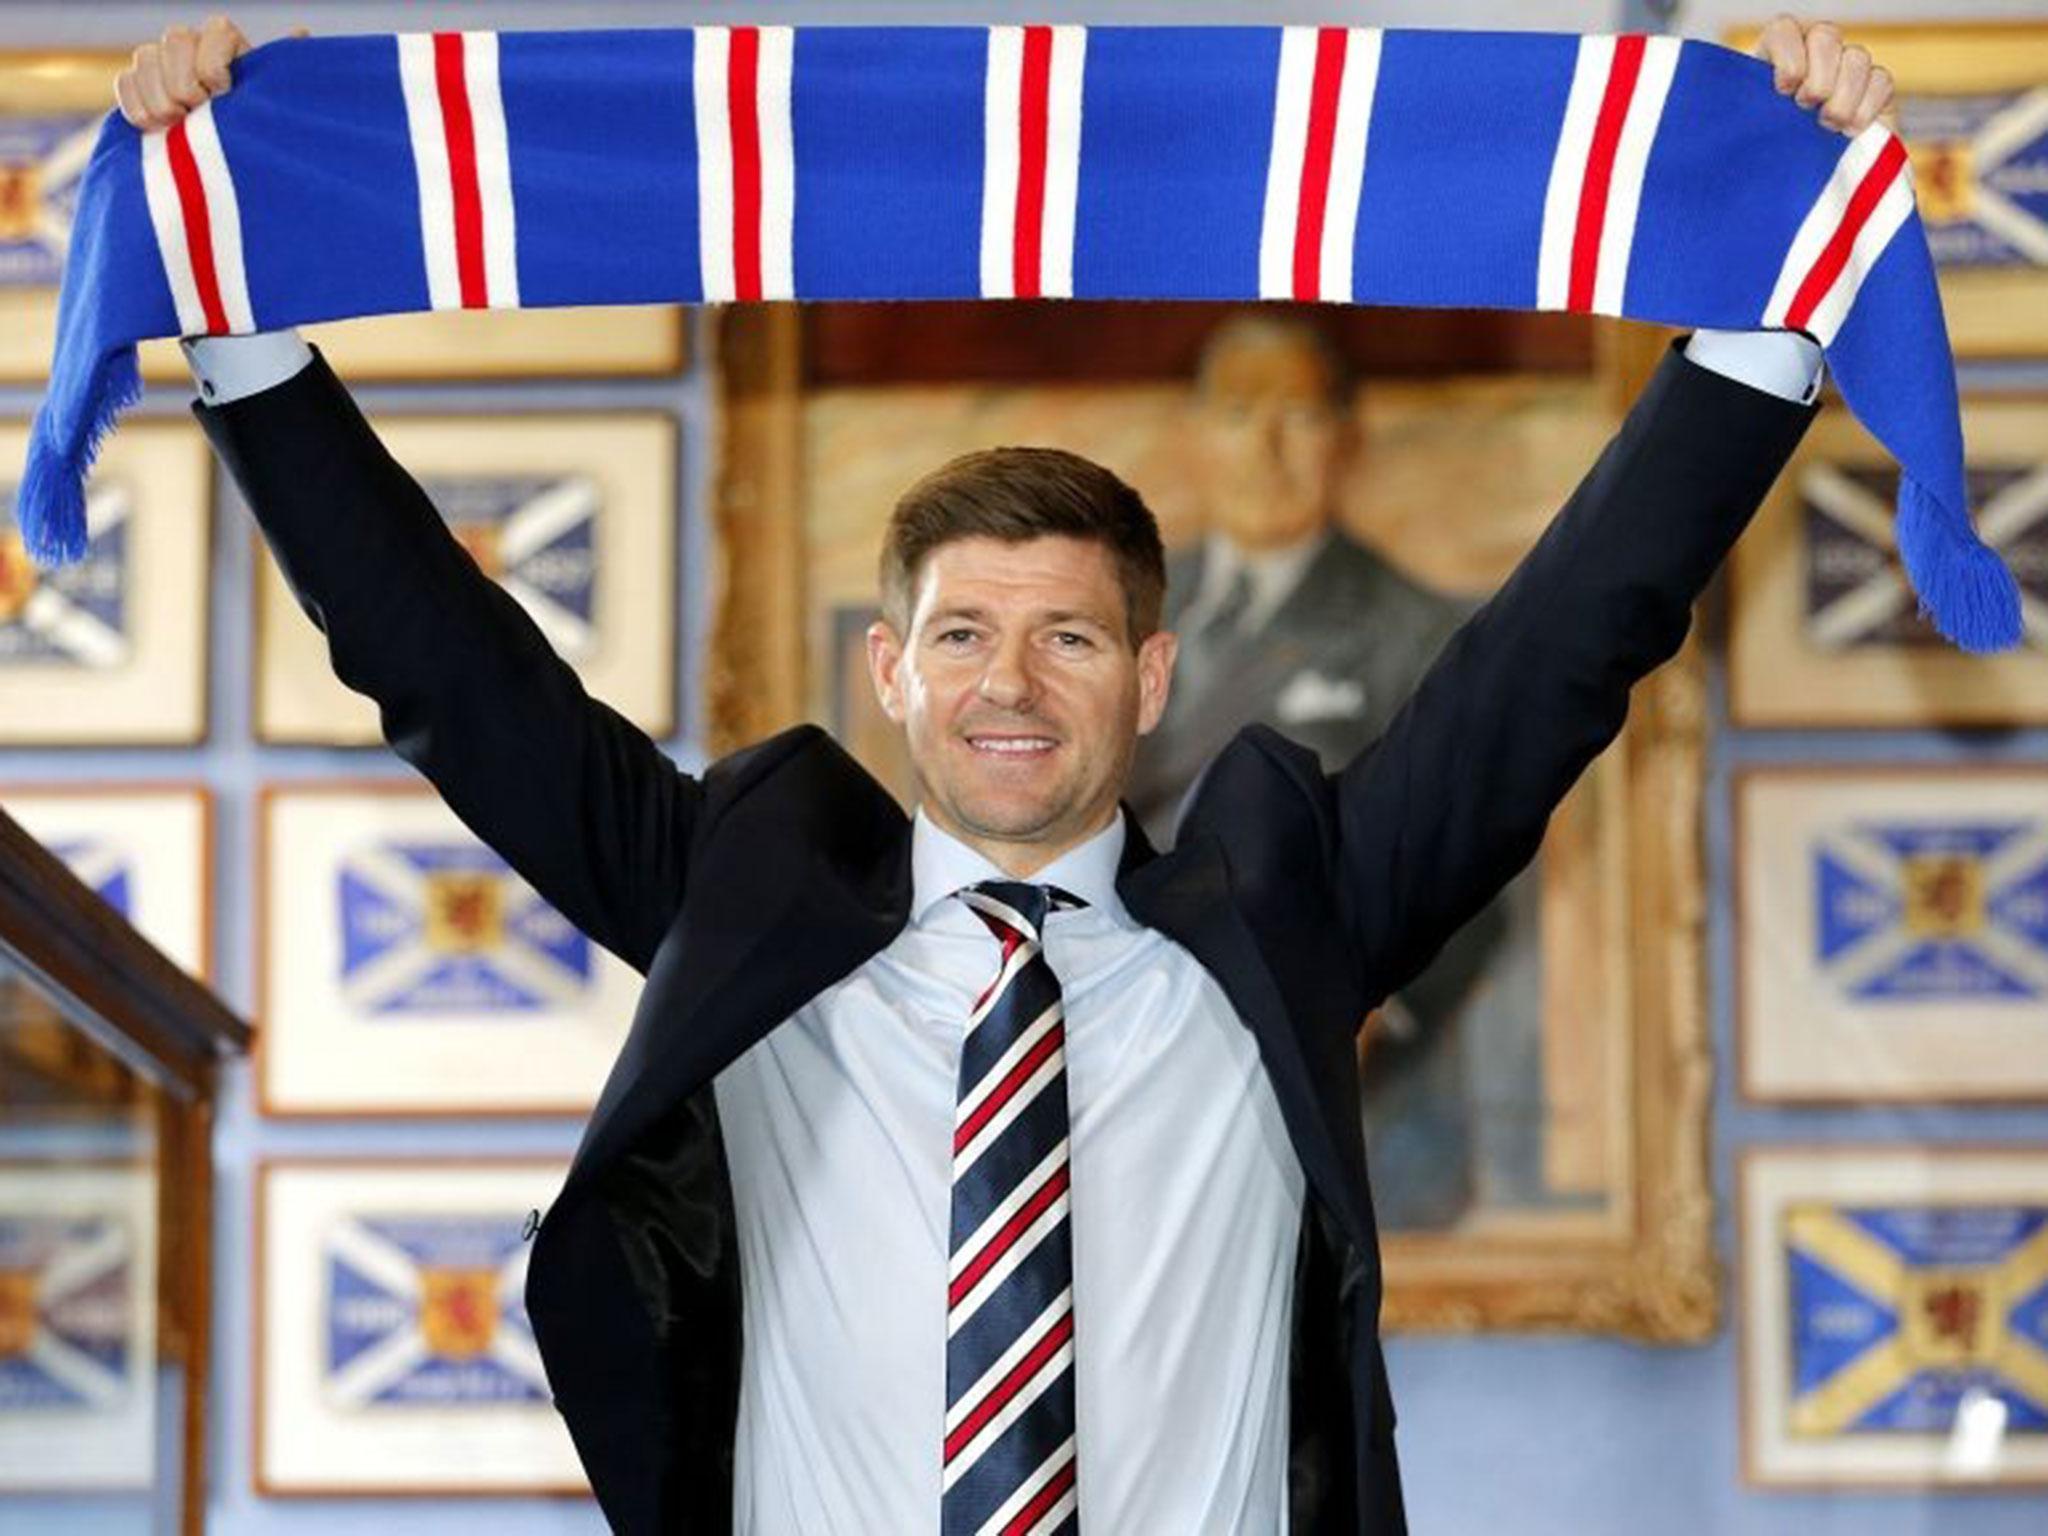 Gerrard officially takes charge of Rangers on Friday